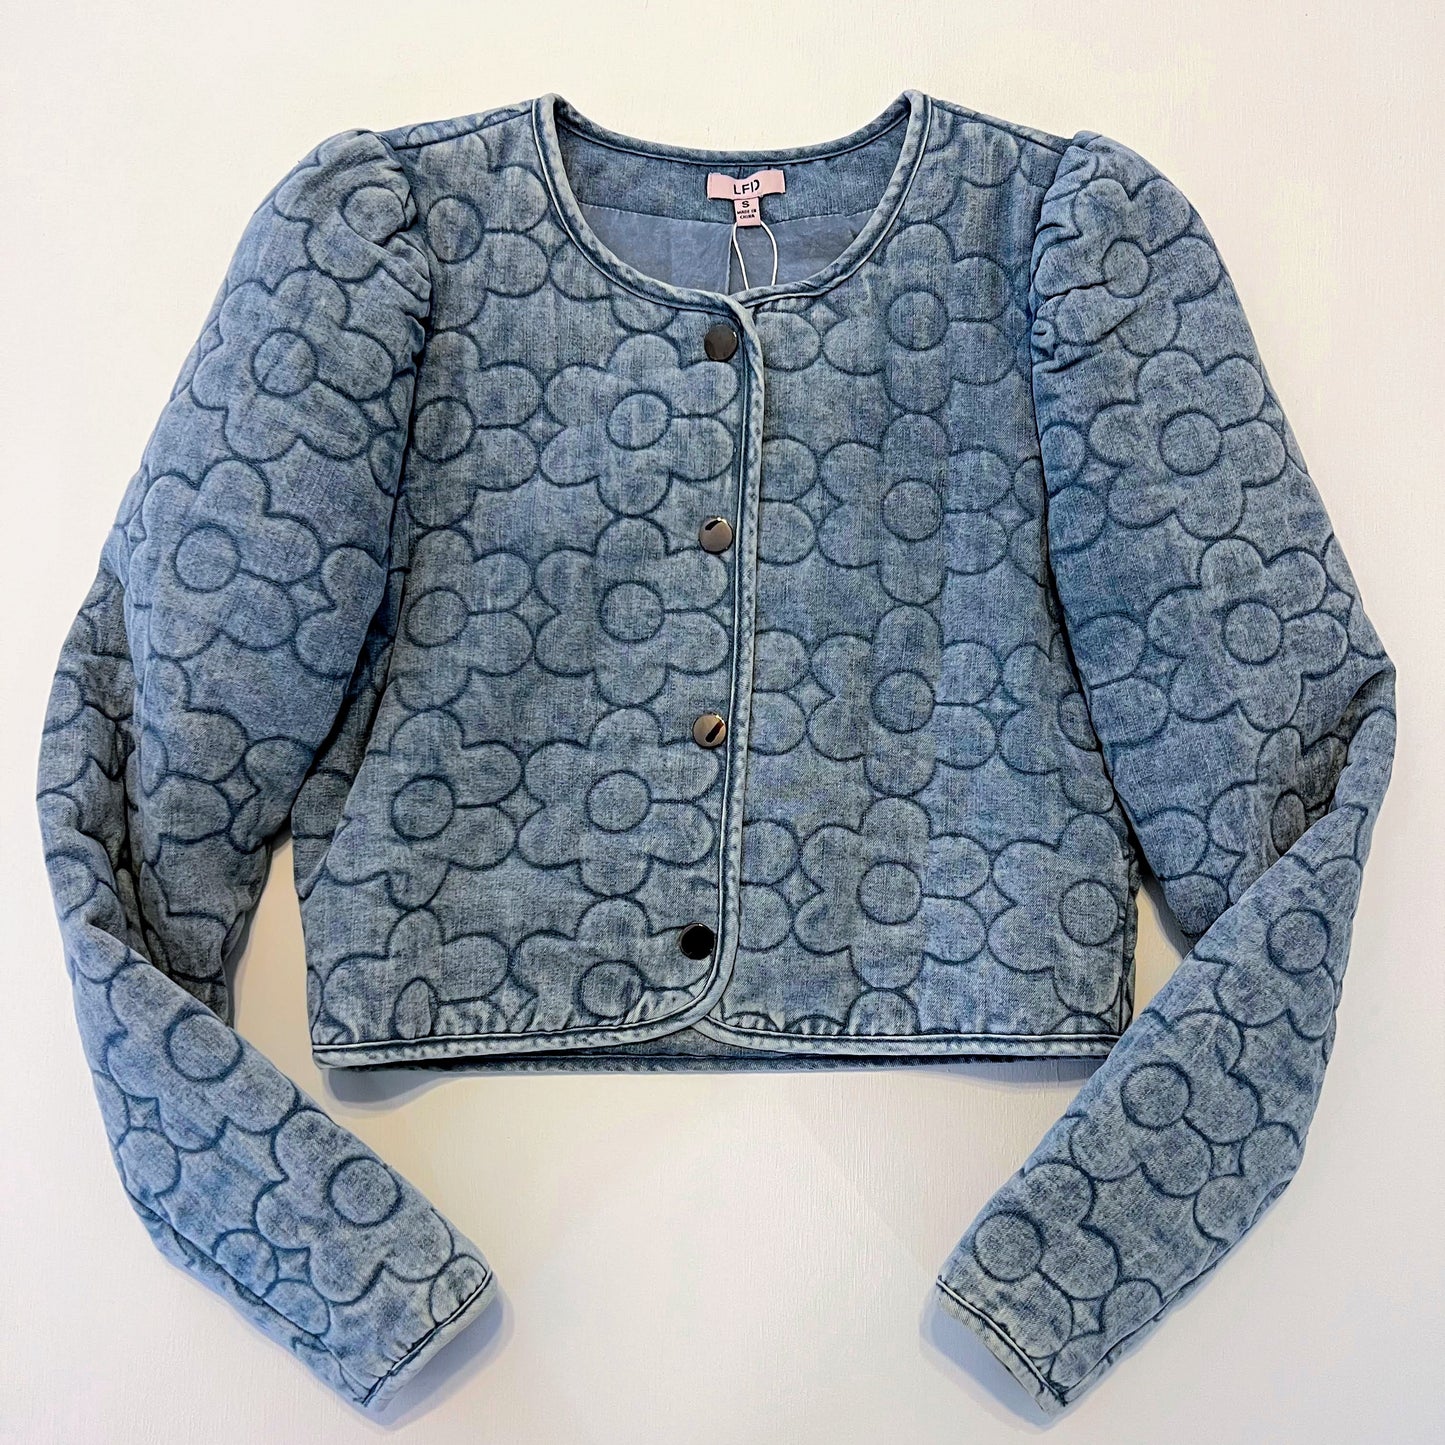 Daisy Quilted Denim Jacket